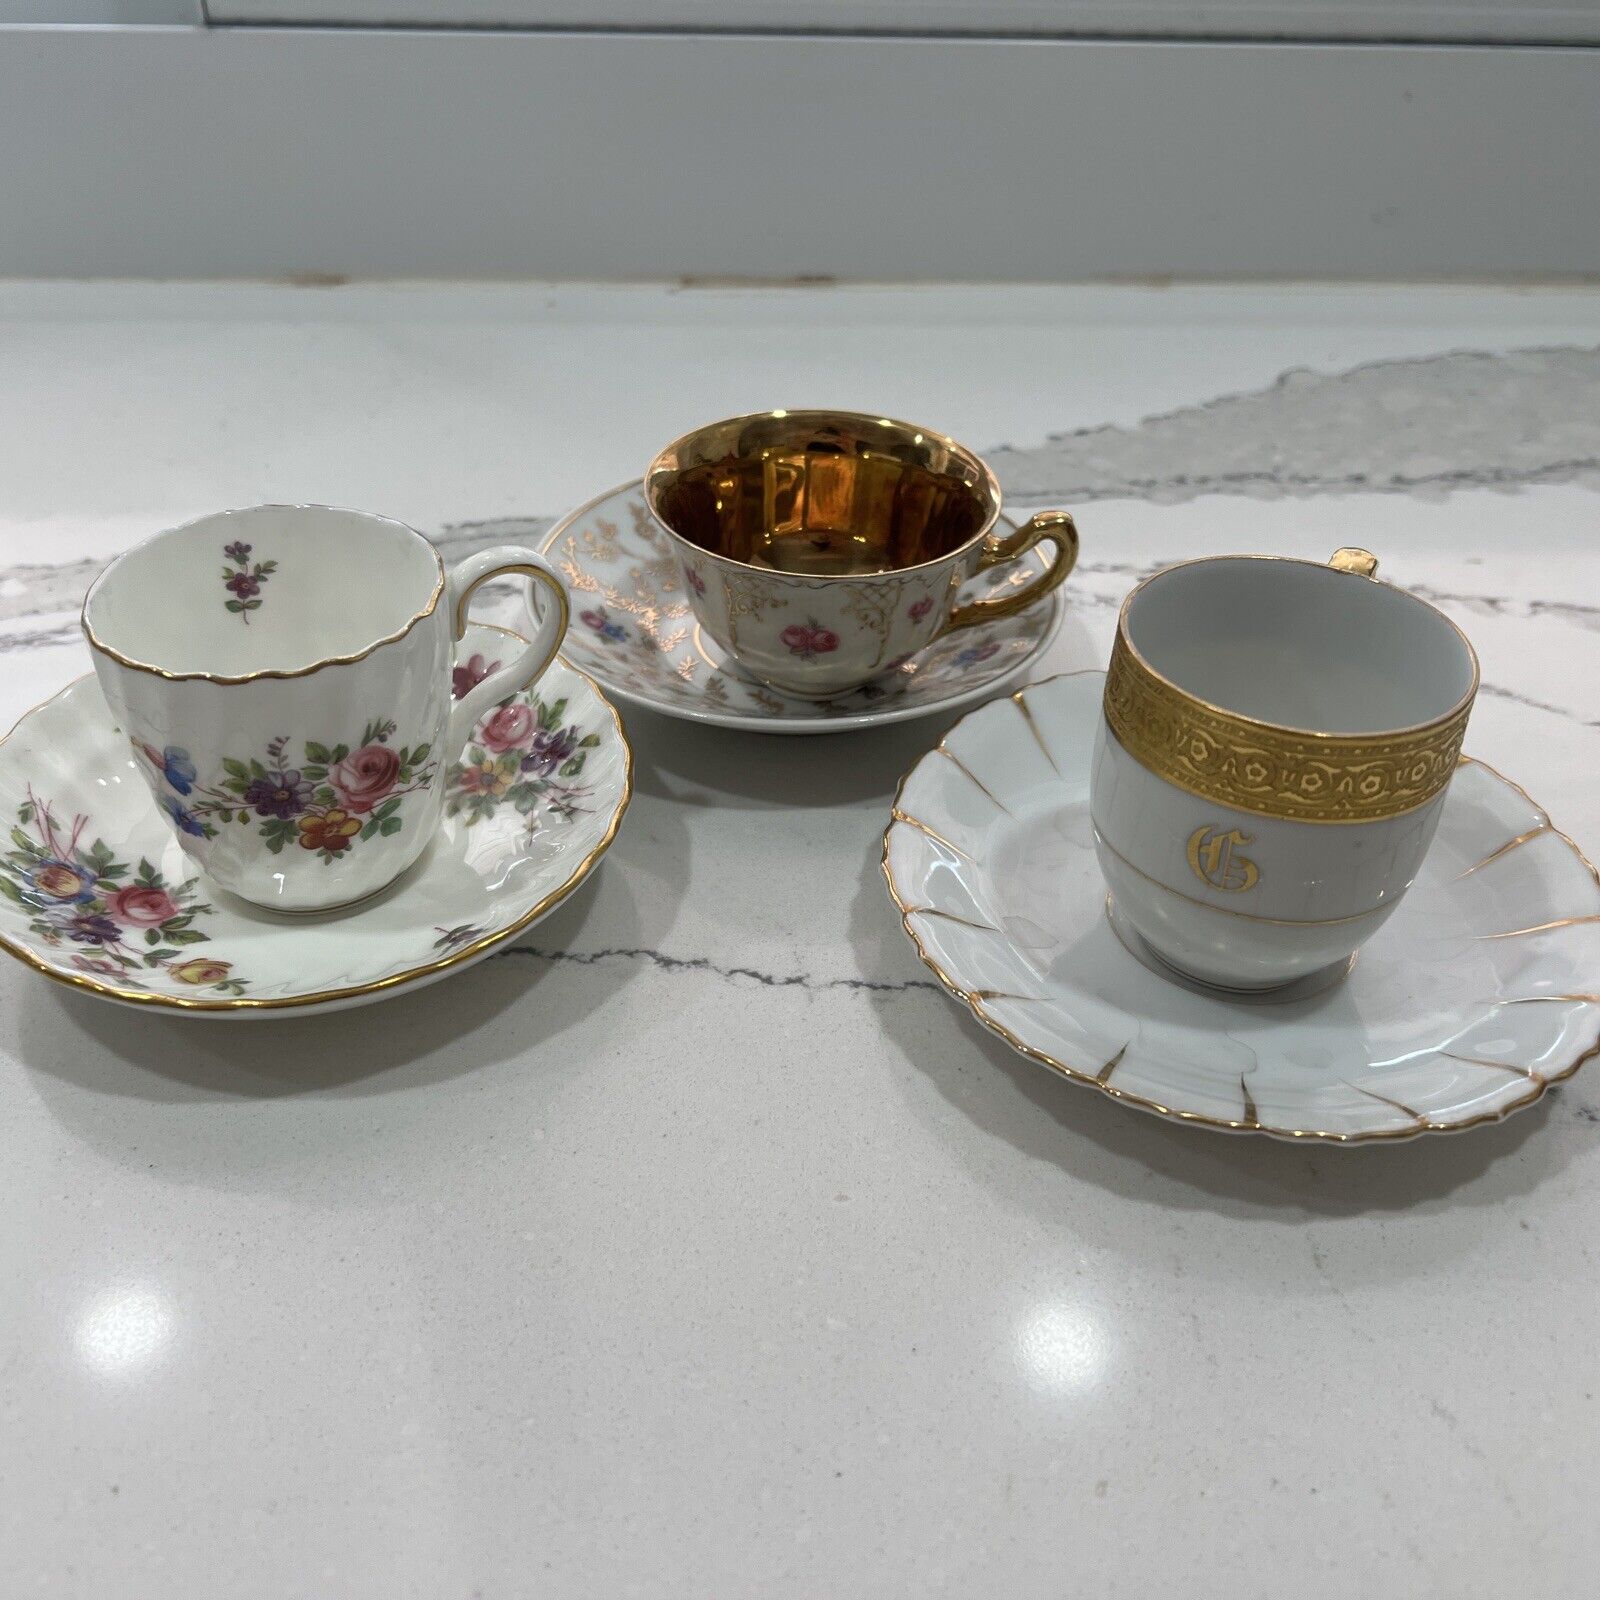 1930s Art Deco Crown Ducal Ware England Demitasse Espresso Cups & Saucers -  Service for 8